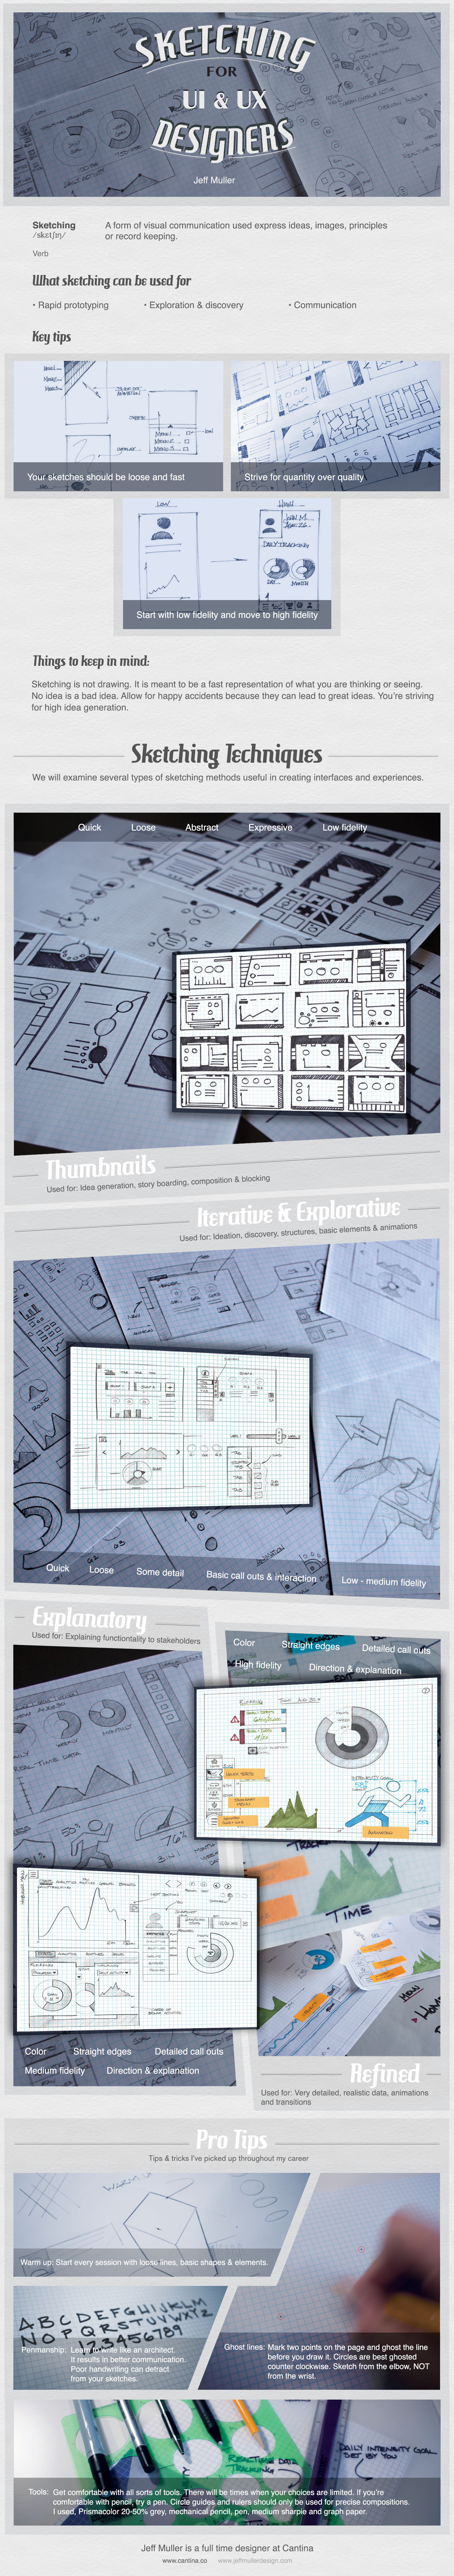 Infographic - Sketching for UX Designers